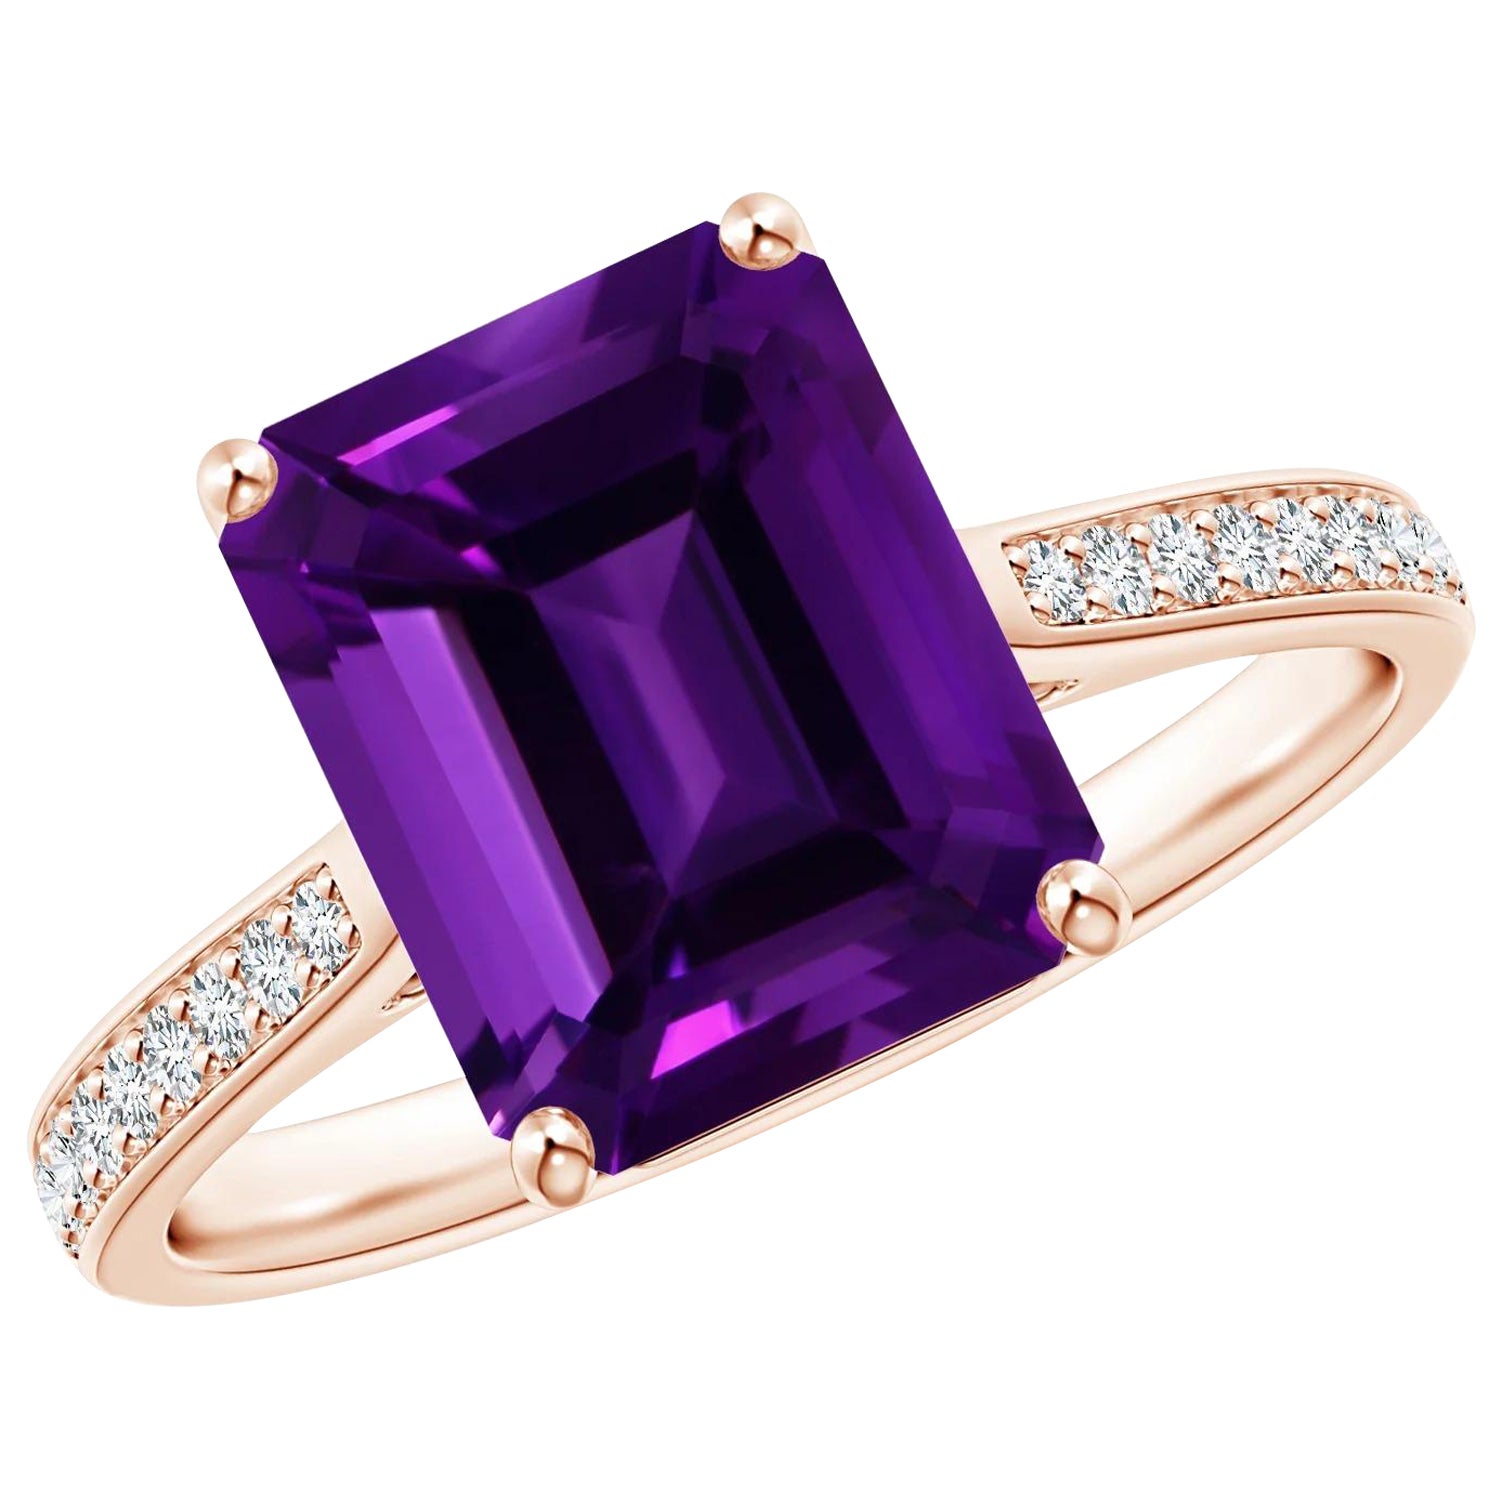 For Sale:  GIA Certified Natural Amethyst Cocktail Ring in Rose Gold with Diamonds